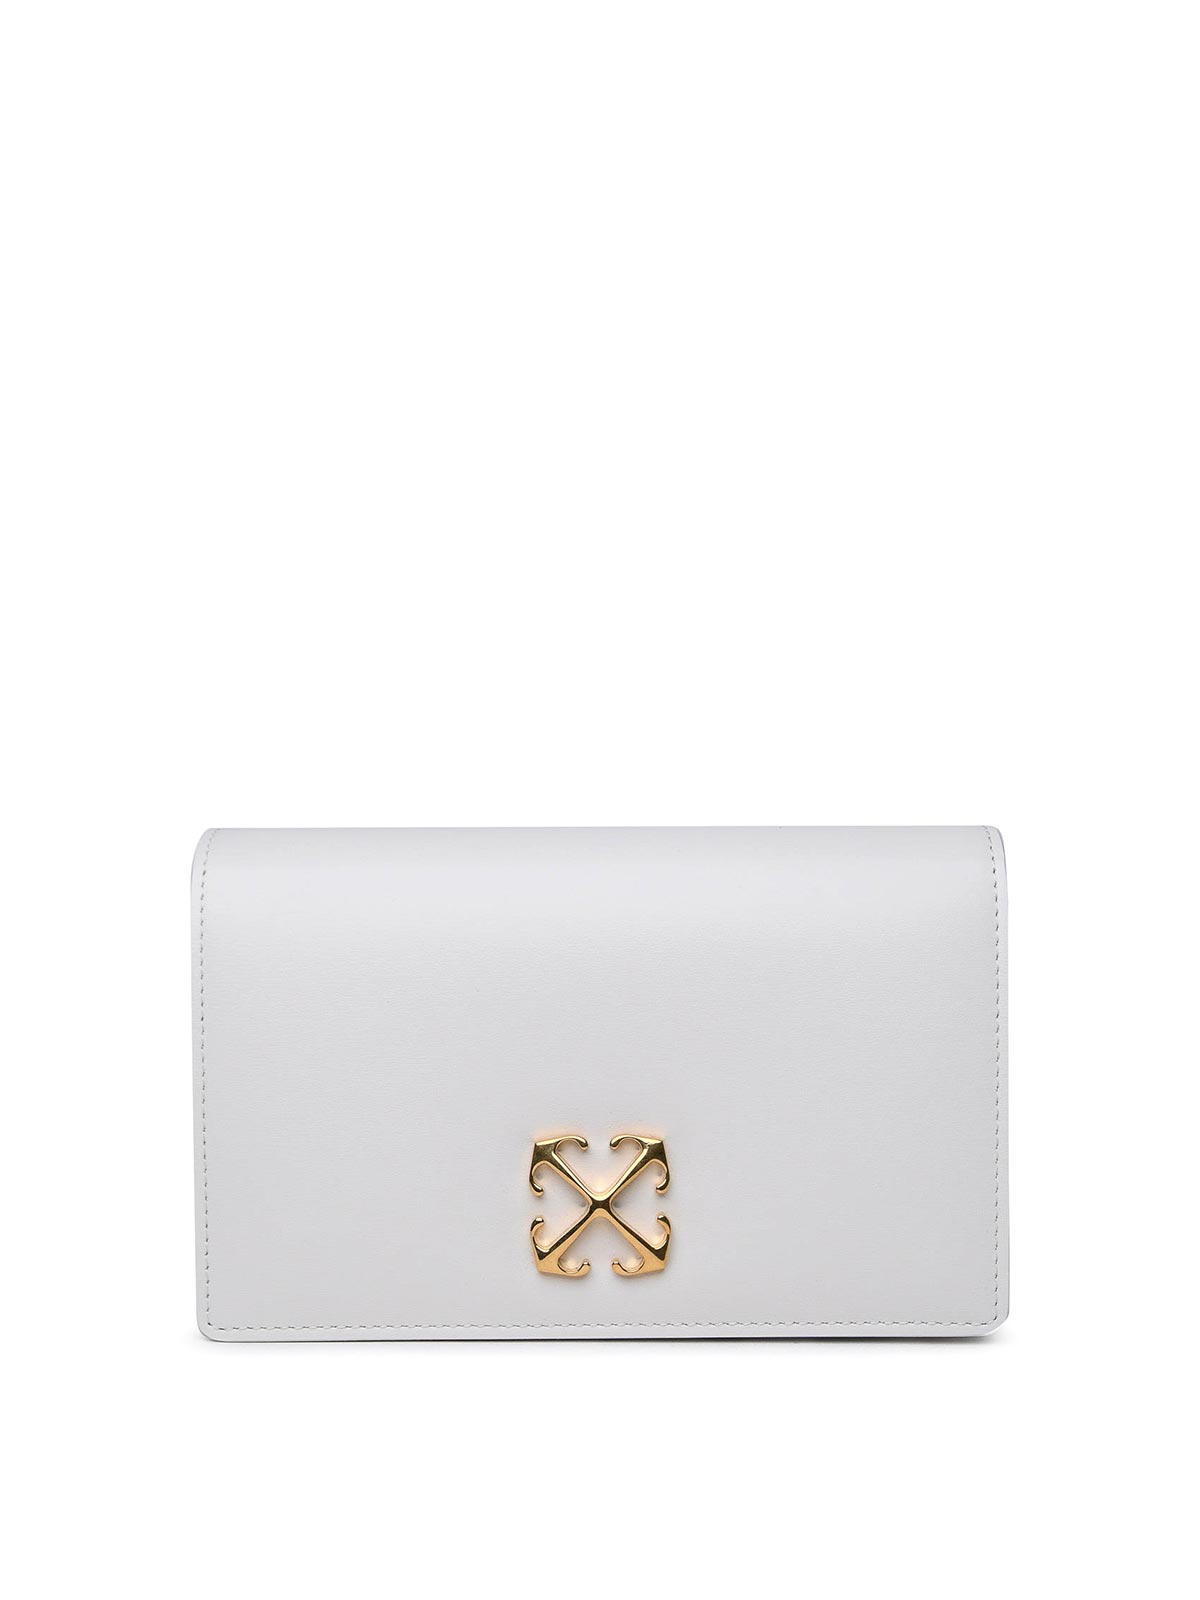 Shop Off-white White Leather Bag